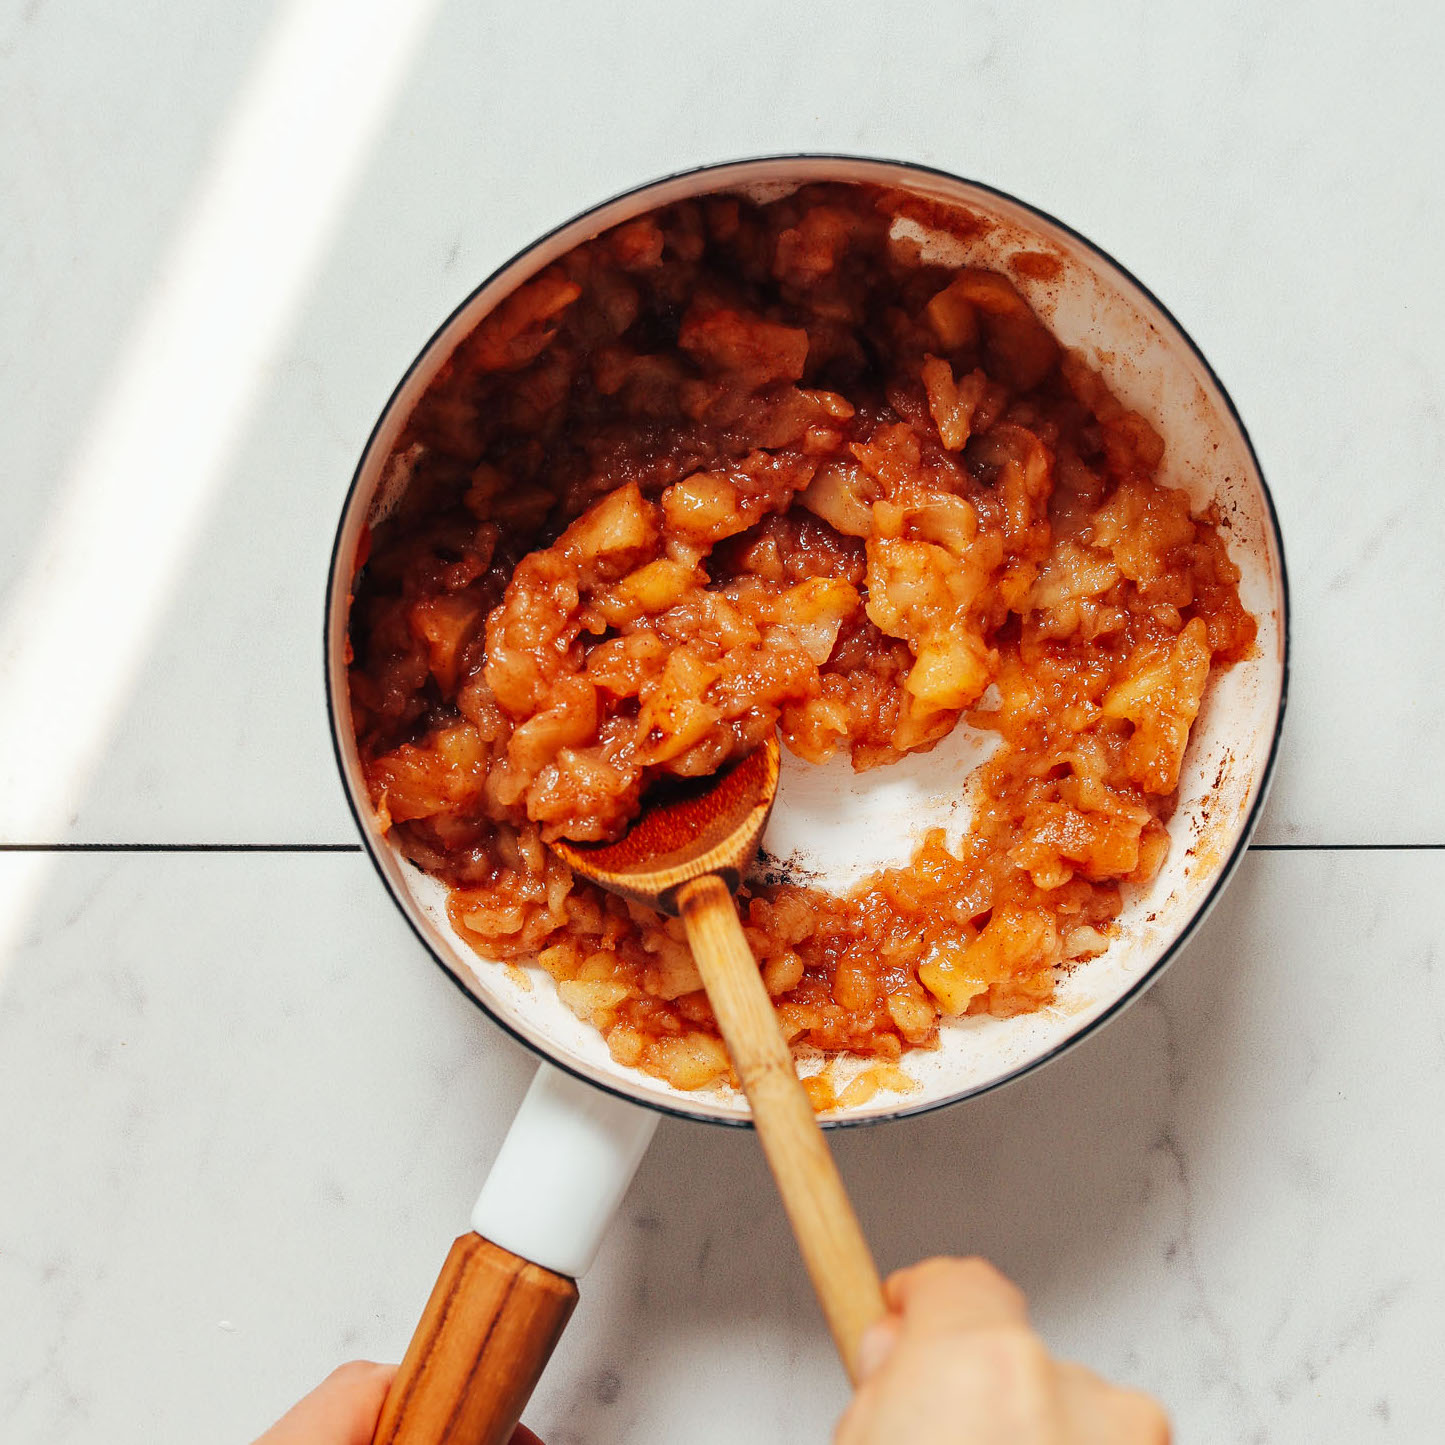 Using a wooden spoon to stir a pan of our easy Applesauce recipe